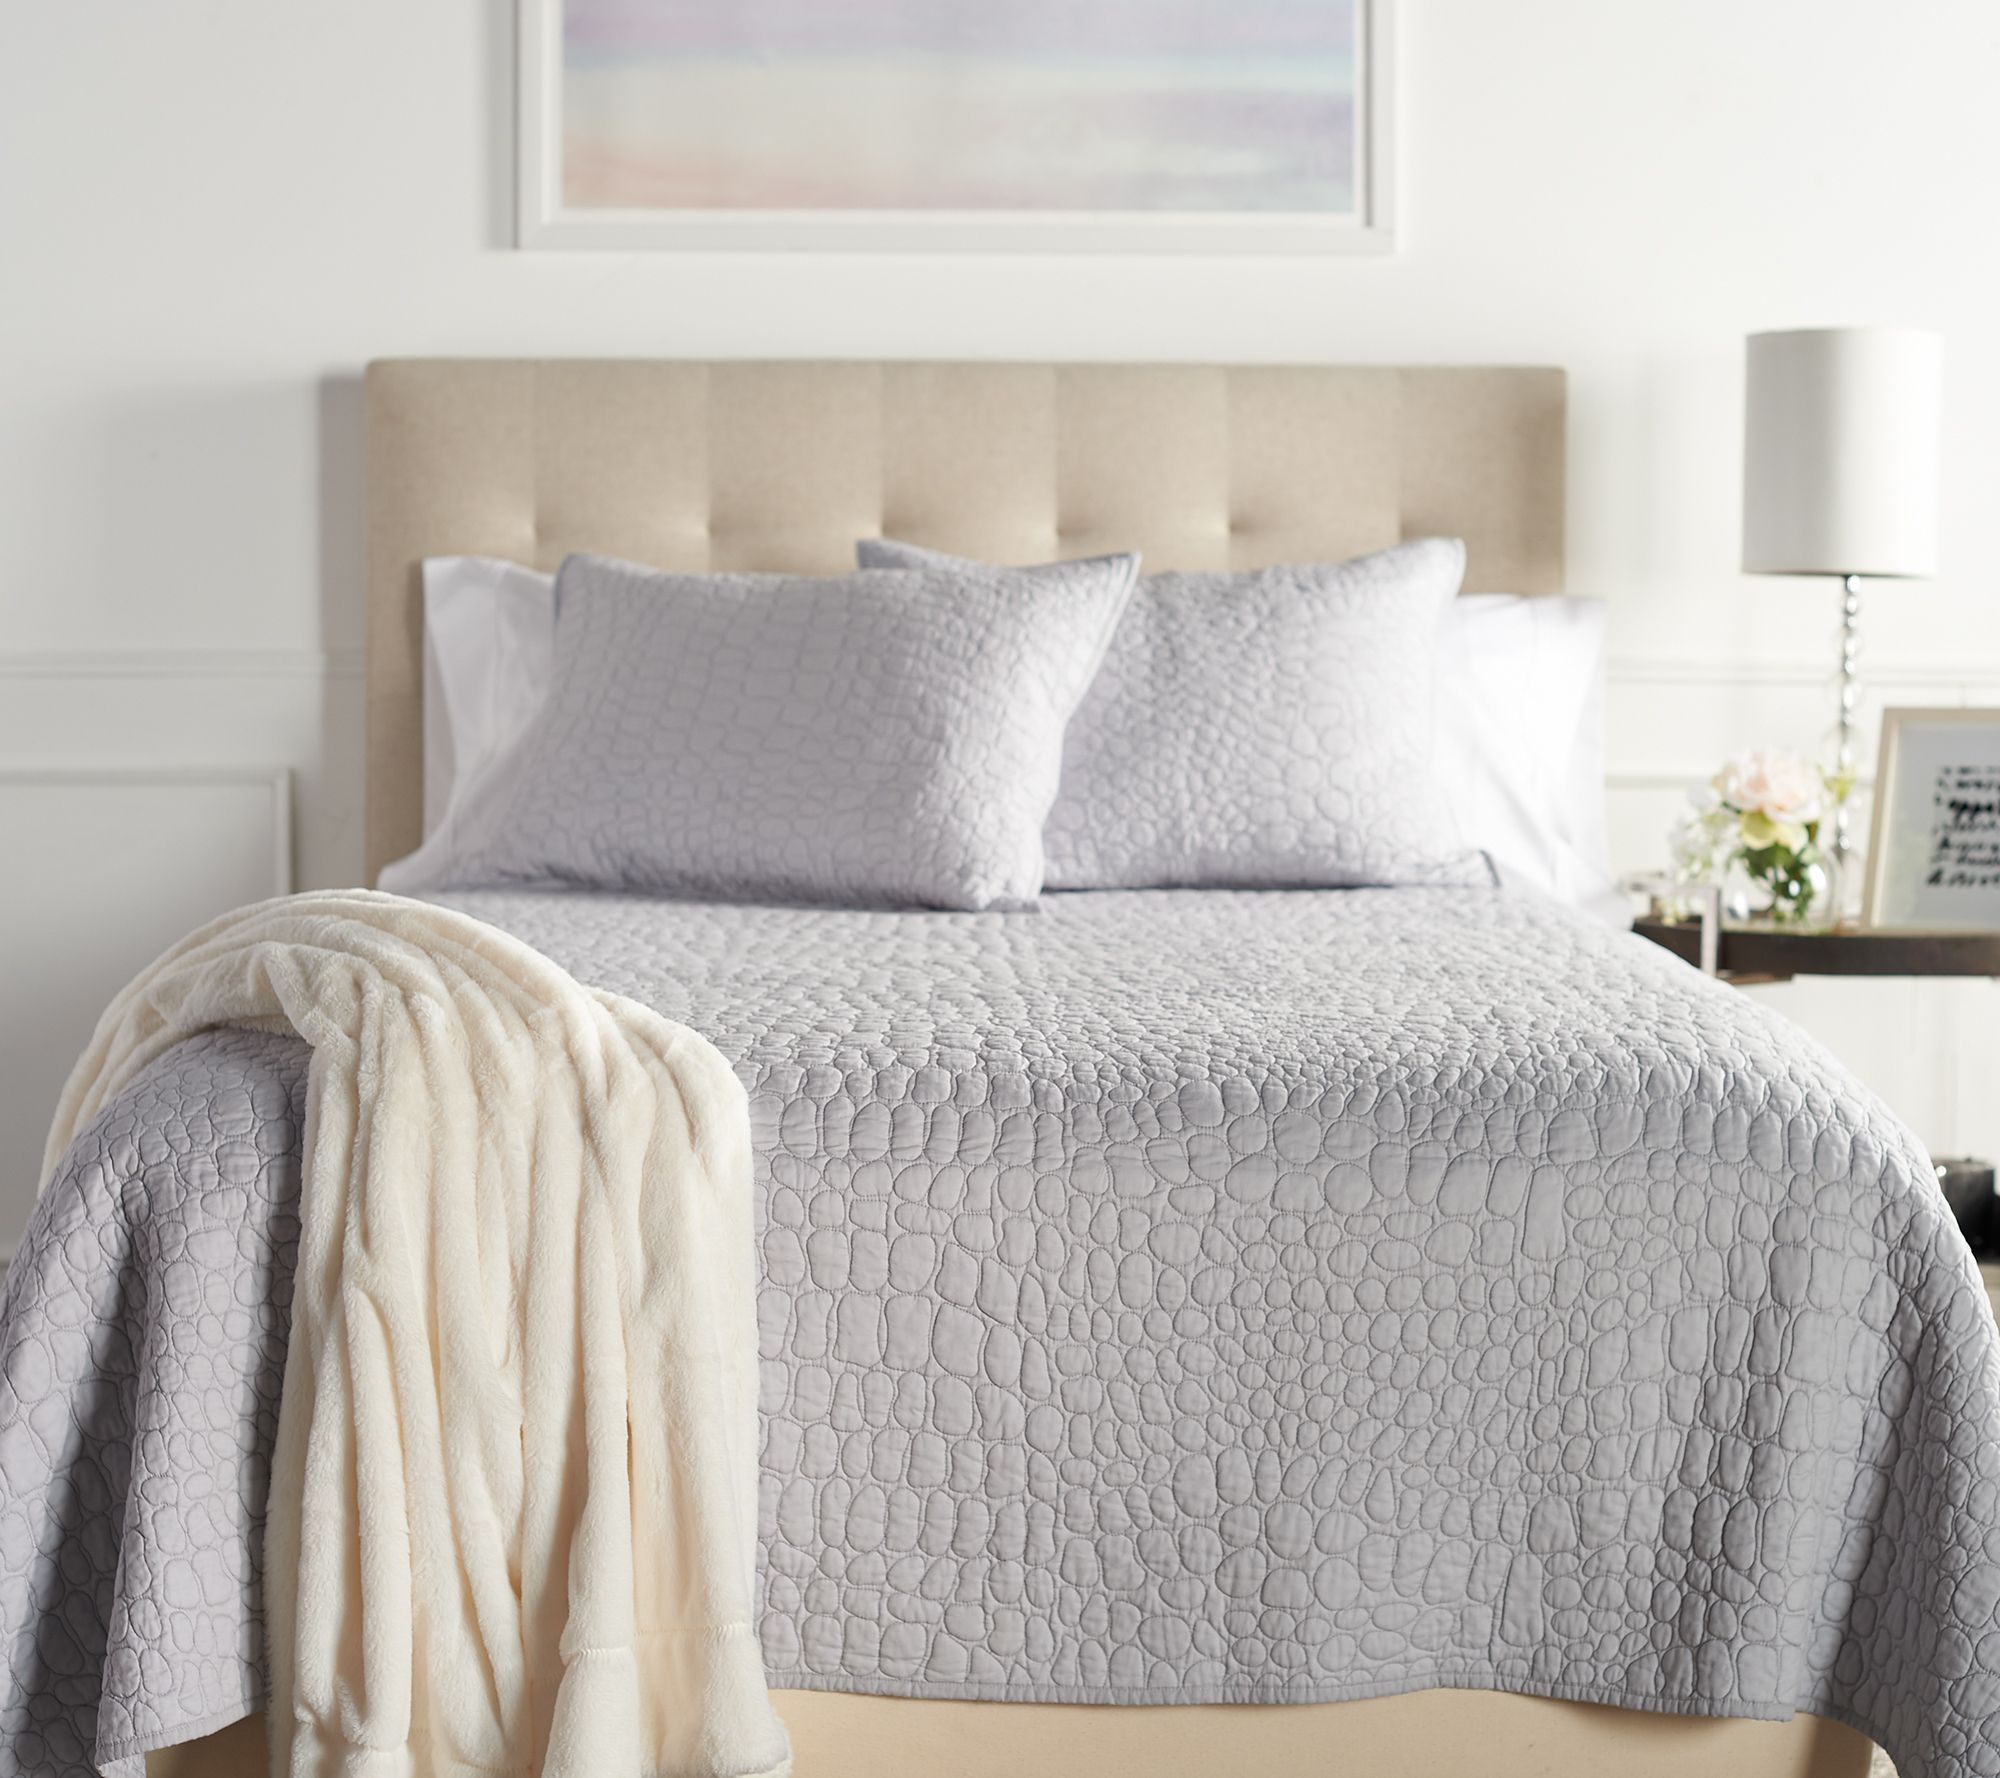 G I L I By Jill Martin 100 Cotton Twin Textured Coverlet Set